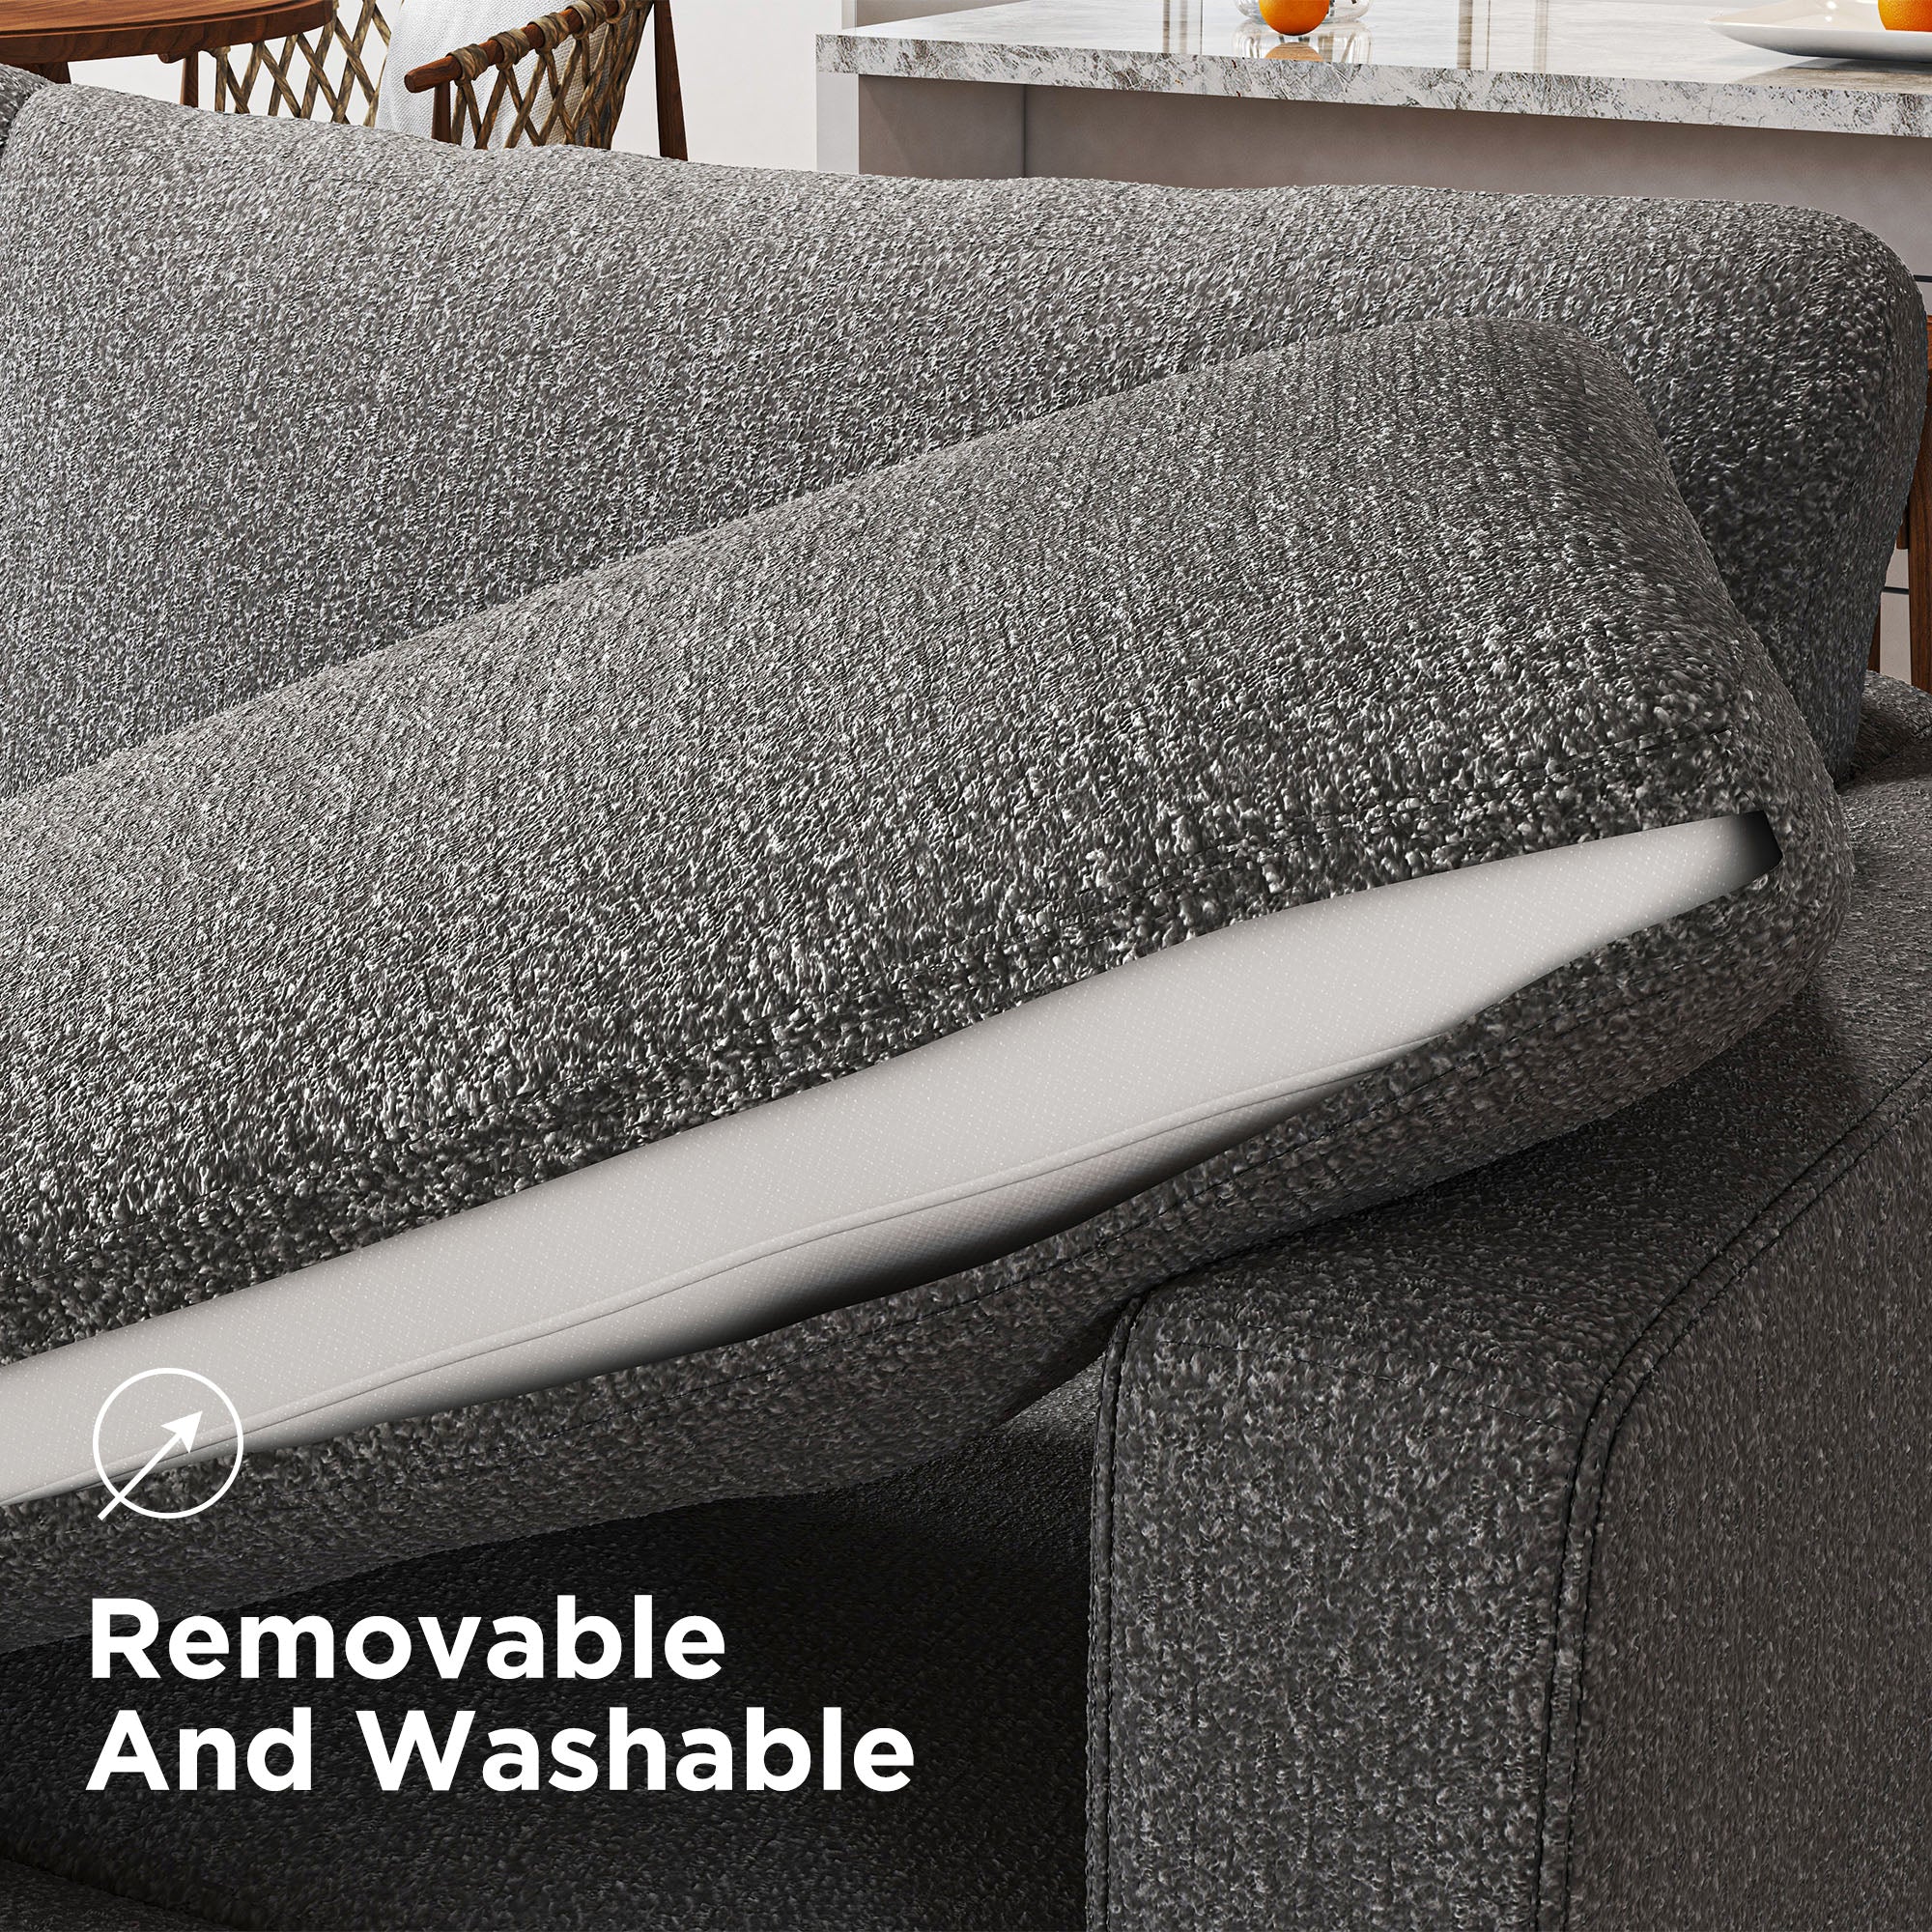 Removable and Washable Back Cushion Cover of HONBAY Modular Sectional Sofa